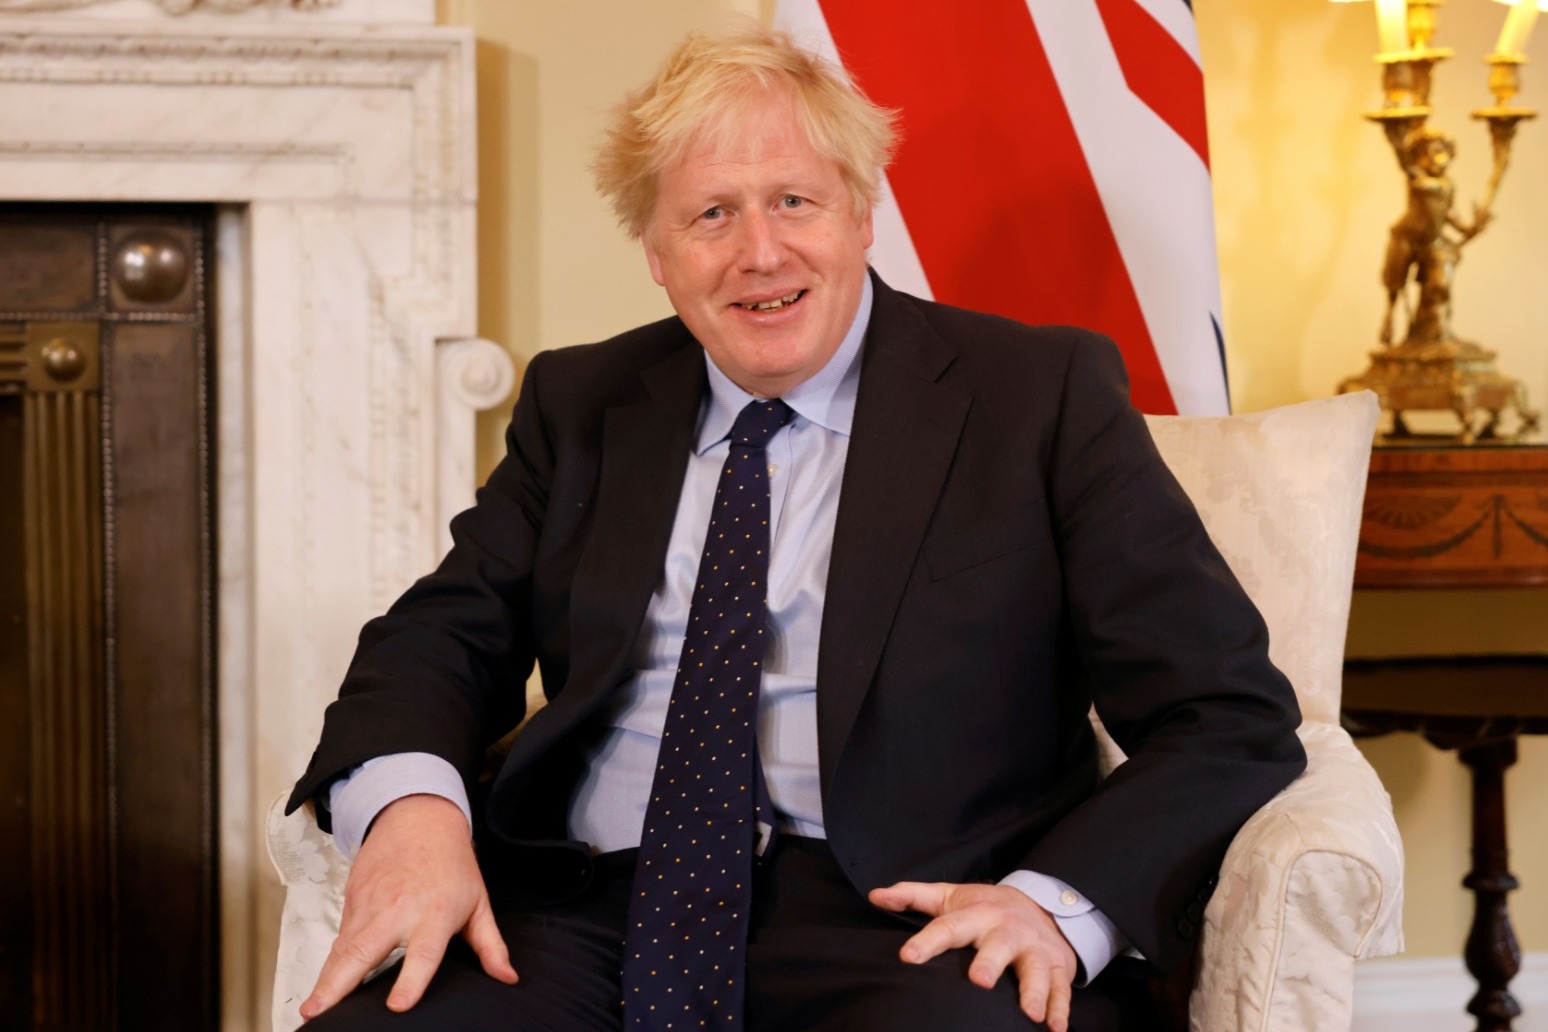 Johnson pledges ‘big, bold’ actions to rebuild Britain after Covid 